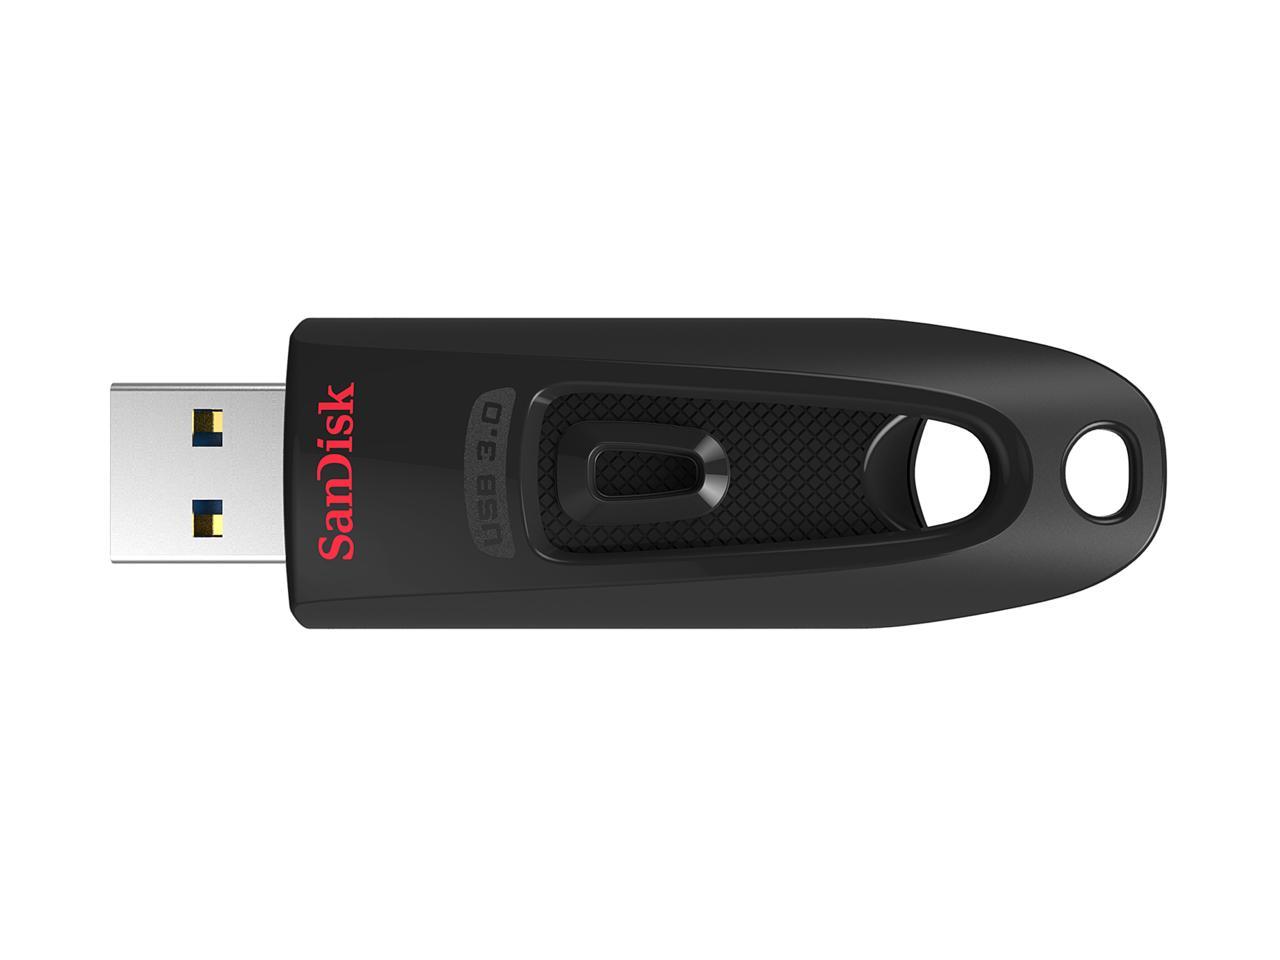 Sandisk 512Gb Ultra Cz48 Usb 3.0 Flash Drive, Speed Up To 100Mb/S (Sdcz48-512G-G46)